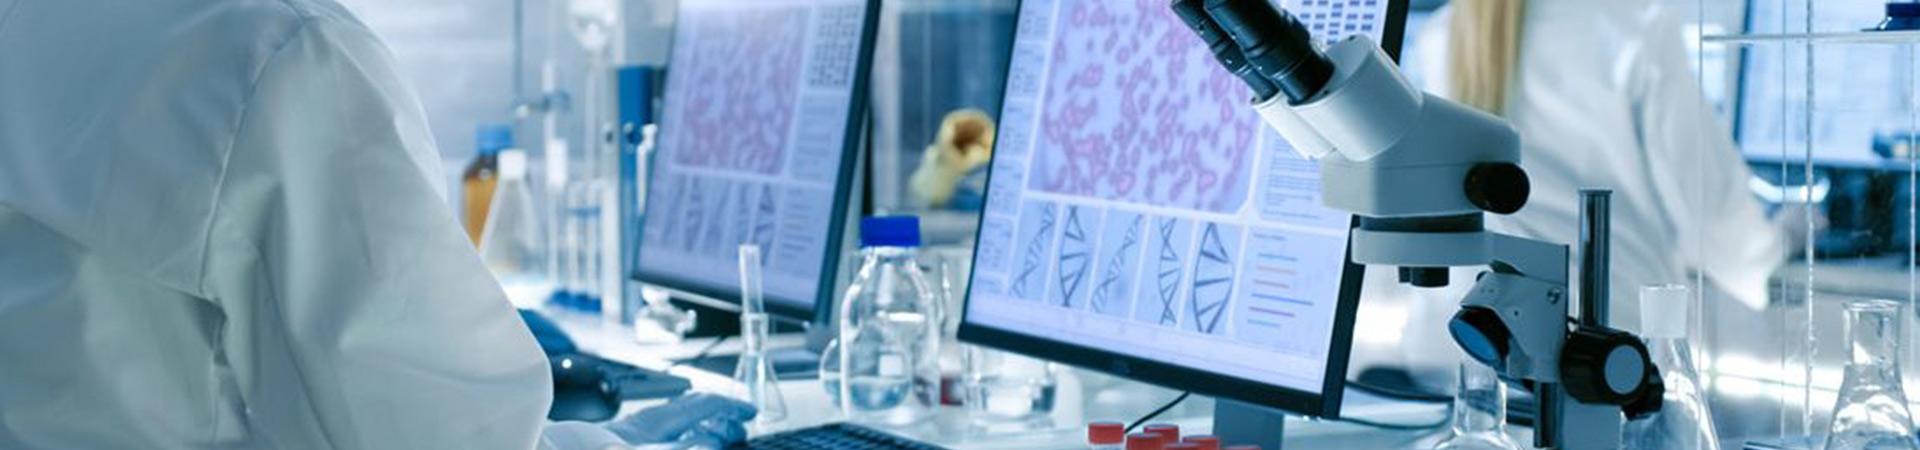 Product Best Pathology Lab Reporting Software in India, USA | Acsonnet.com image